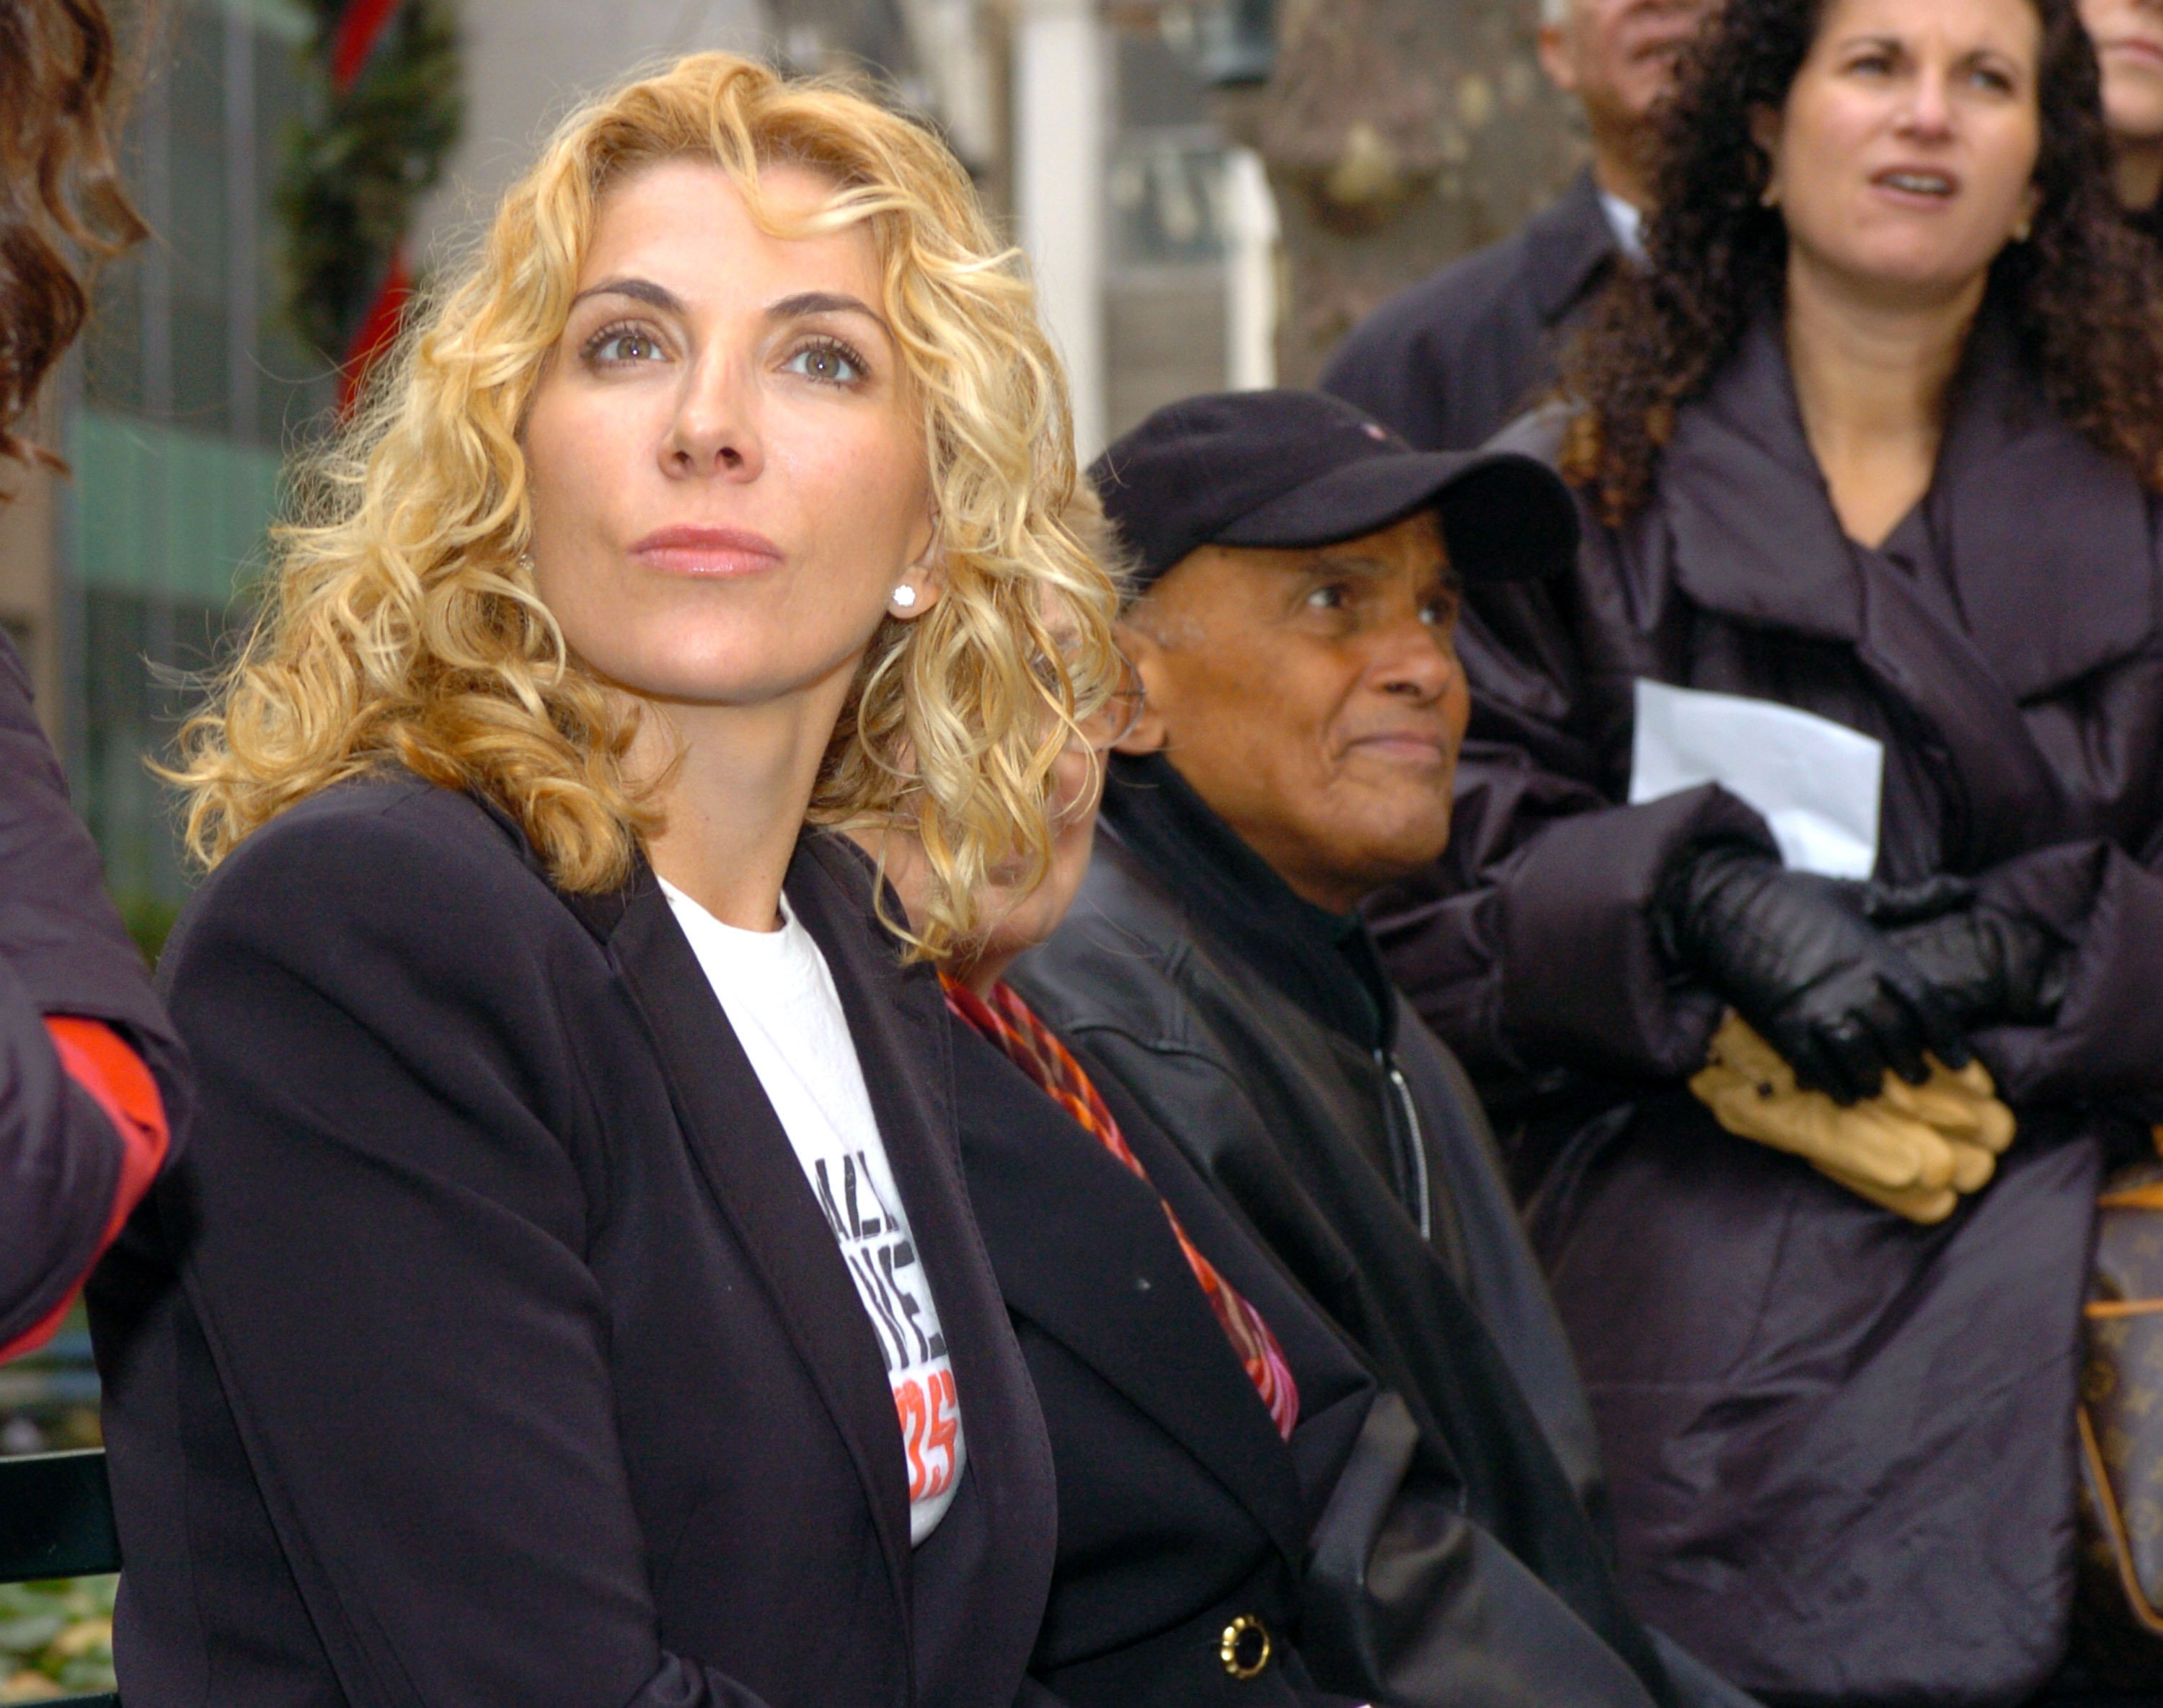 Natasha Richardson and Harry Belafonte at Bryant Park on December 1, 2005 in Manhattan, New York / Source: Getty Images